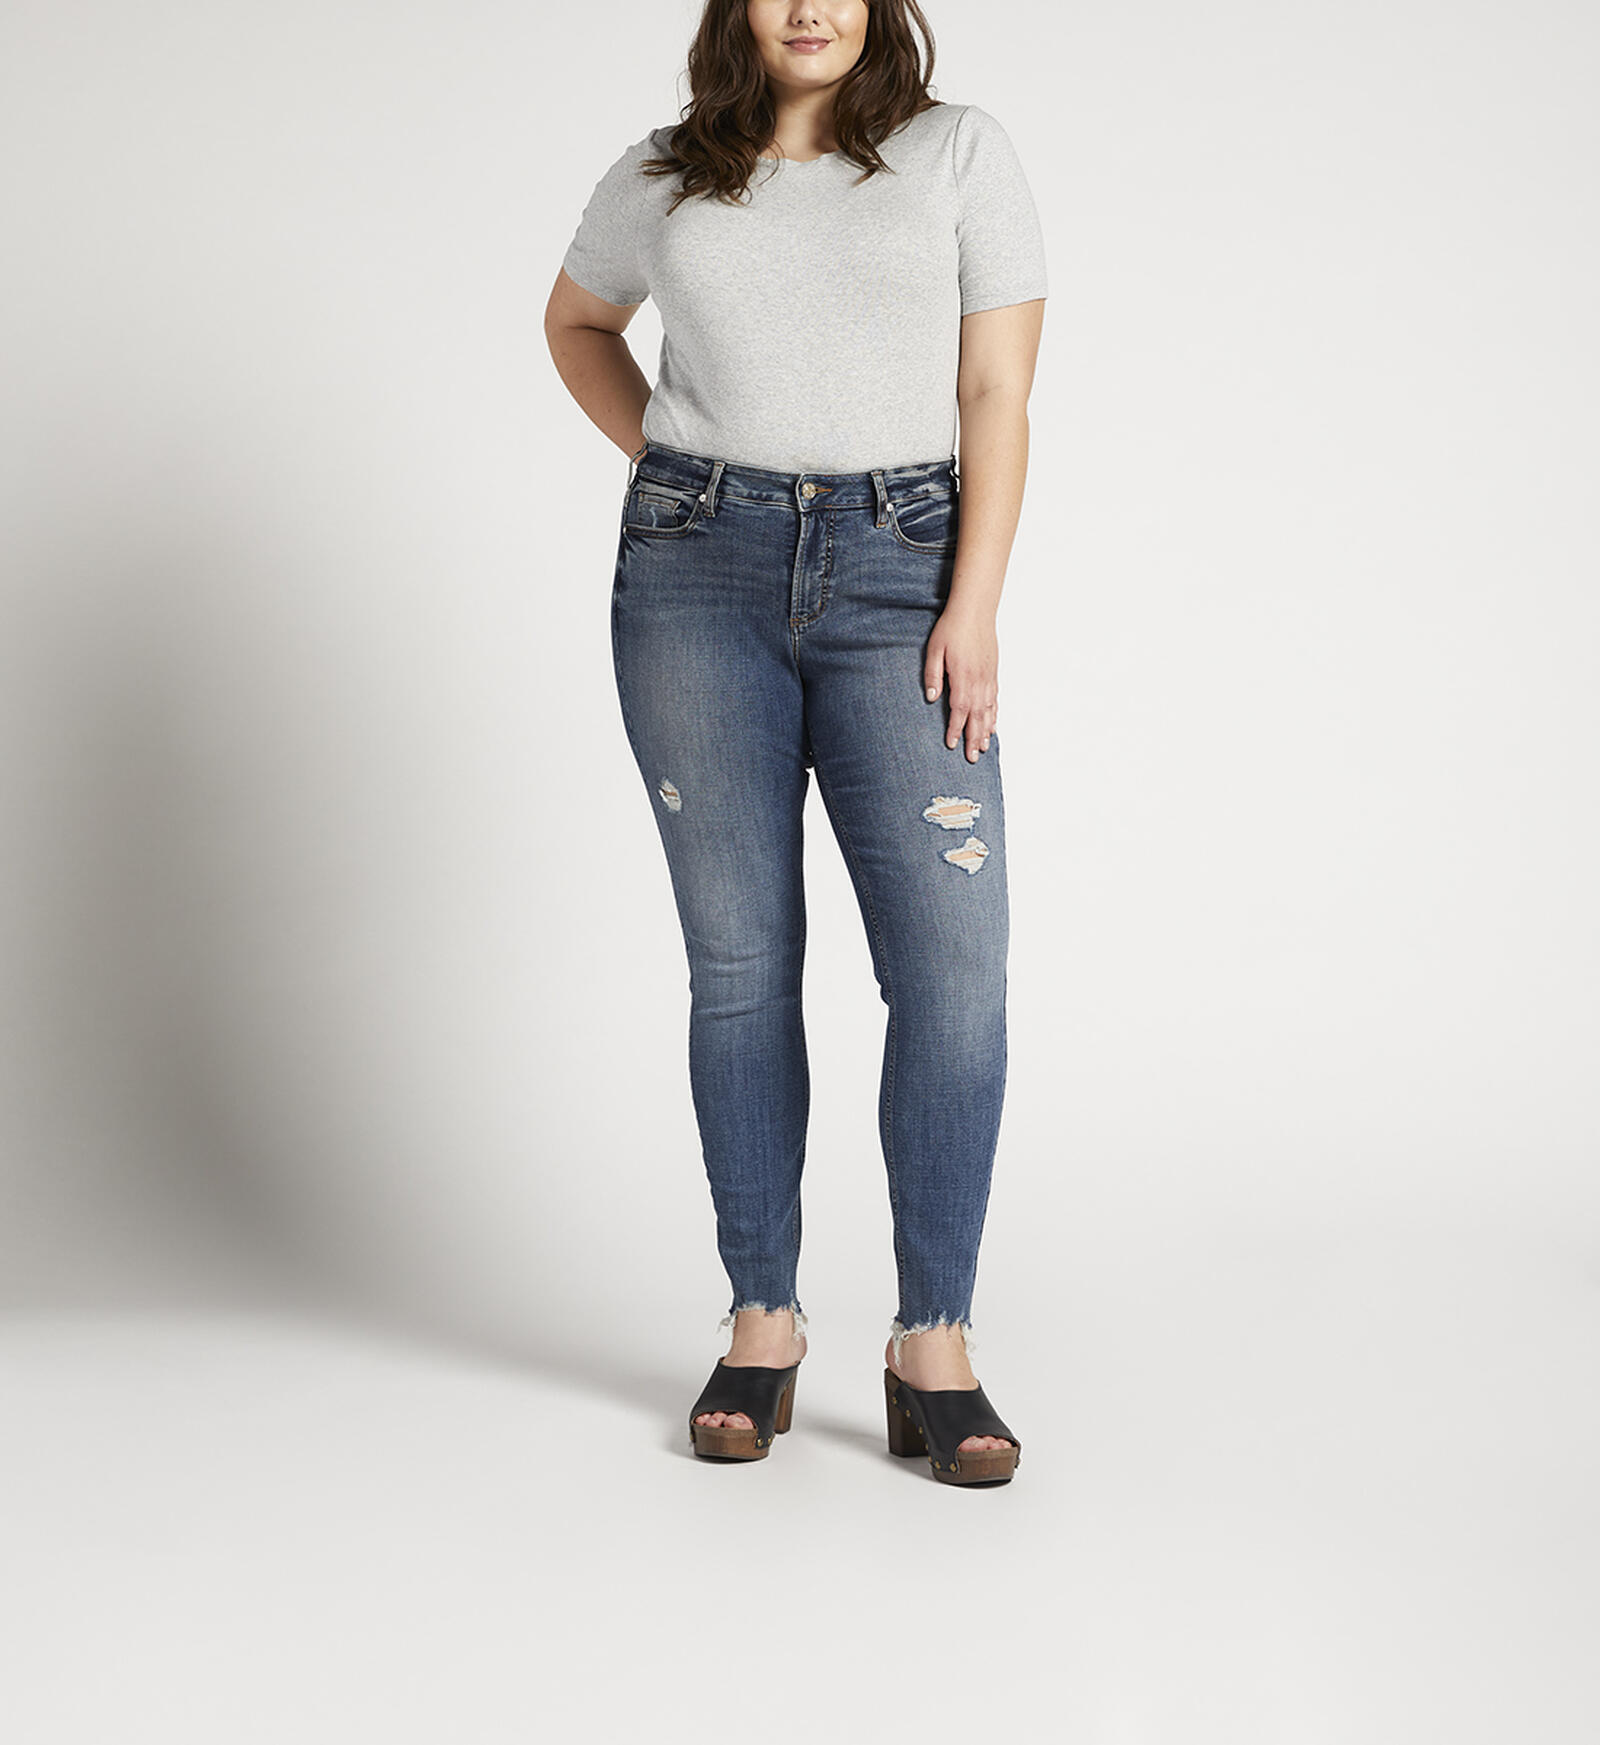 Buy Suki Mid Rise Skinny Jeans Plus Size for CAD 64.00 | Jeans CA New